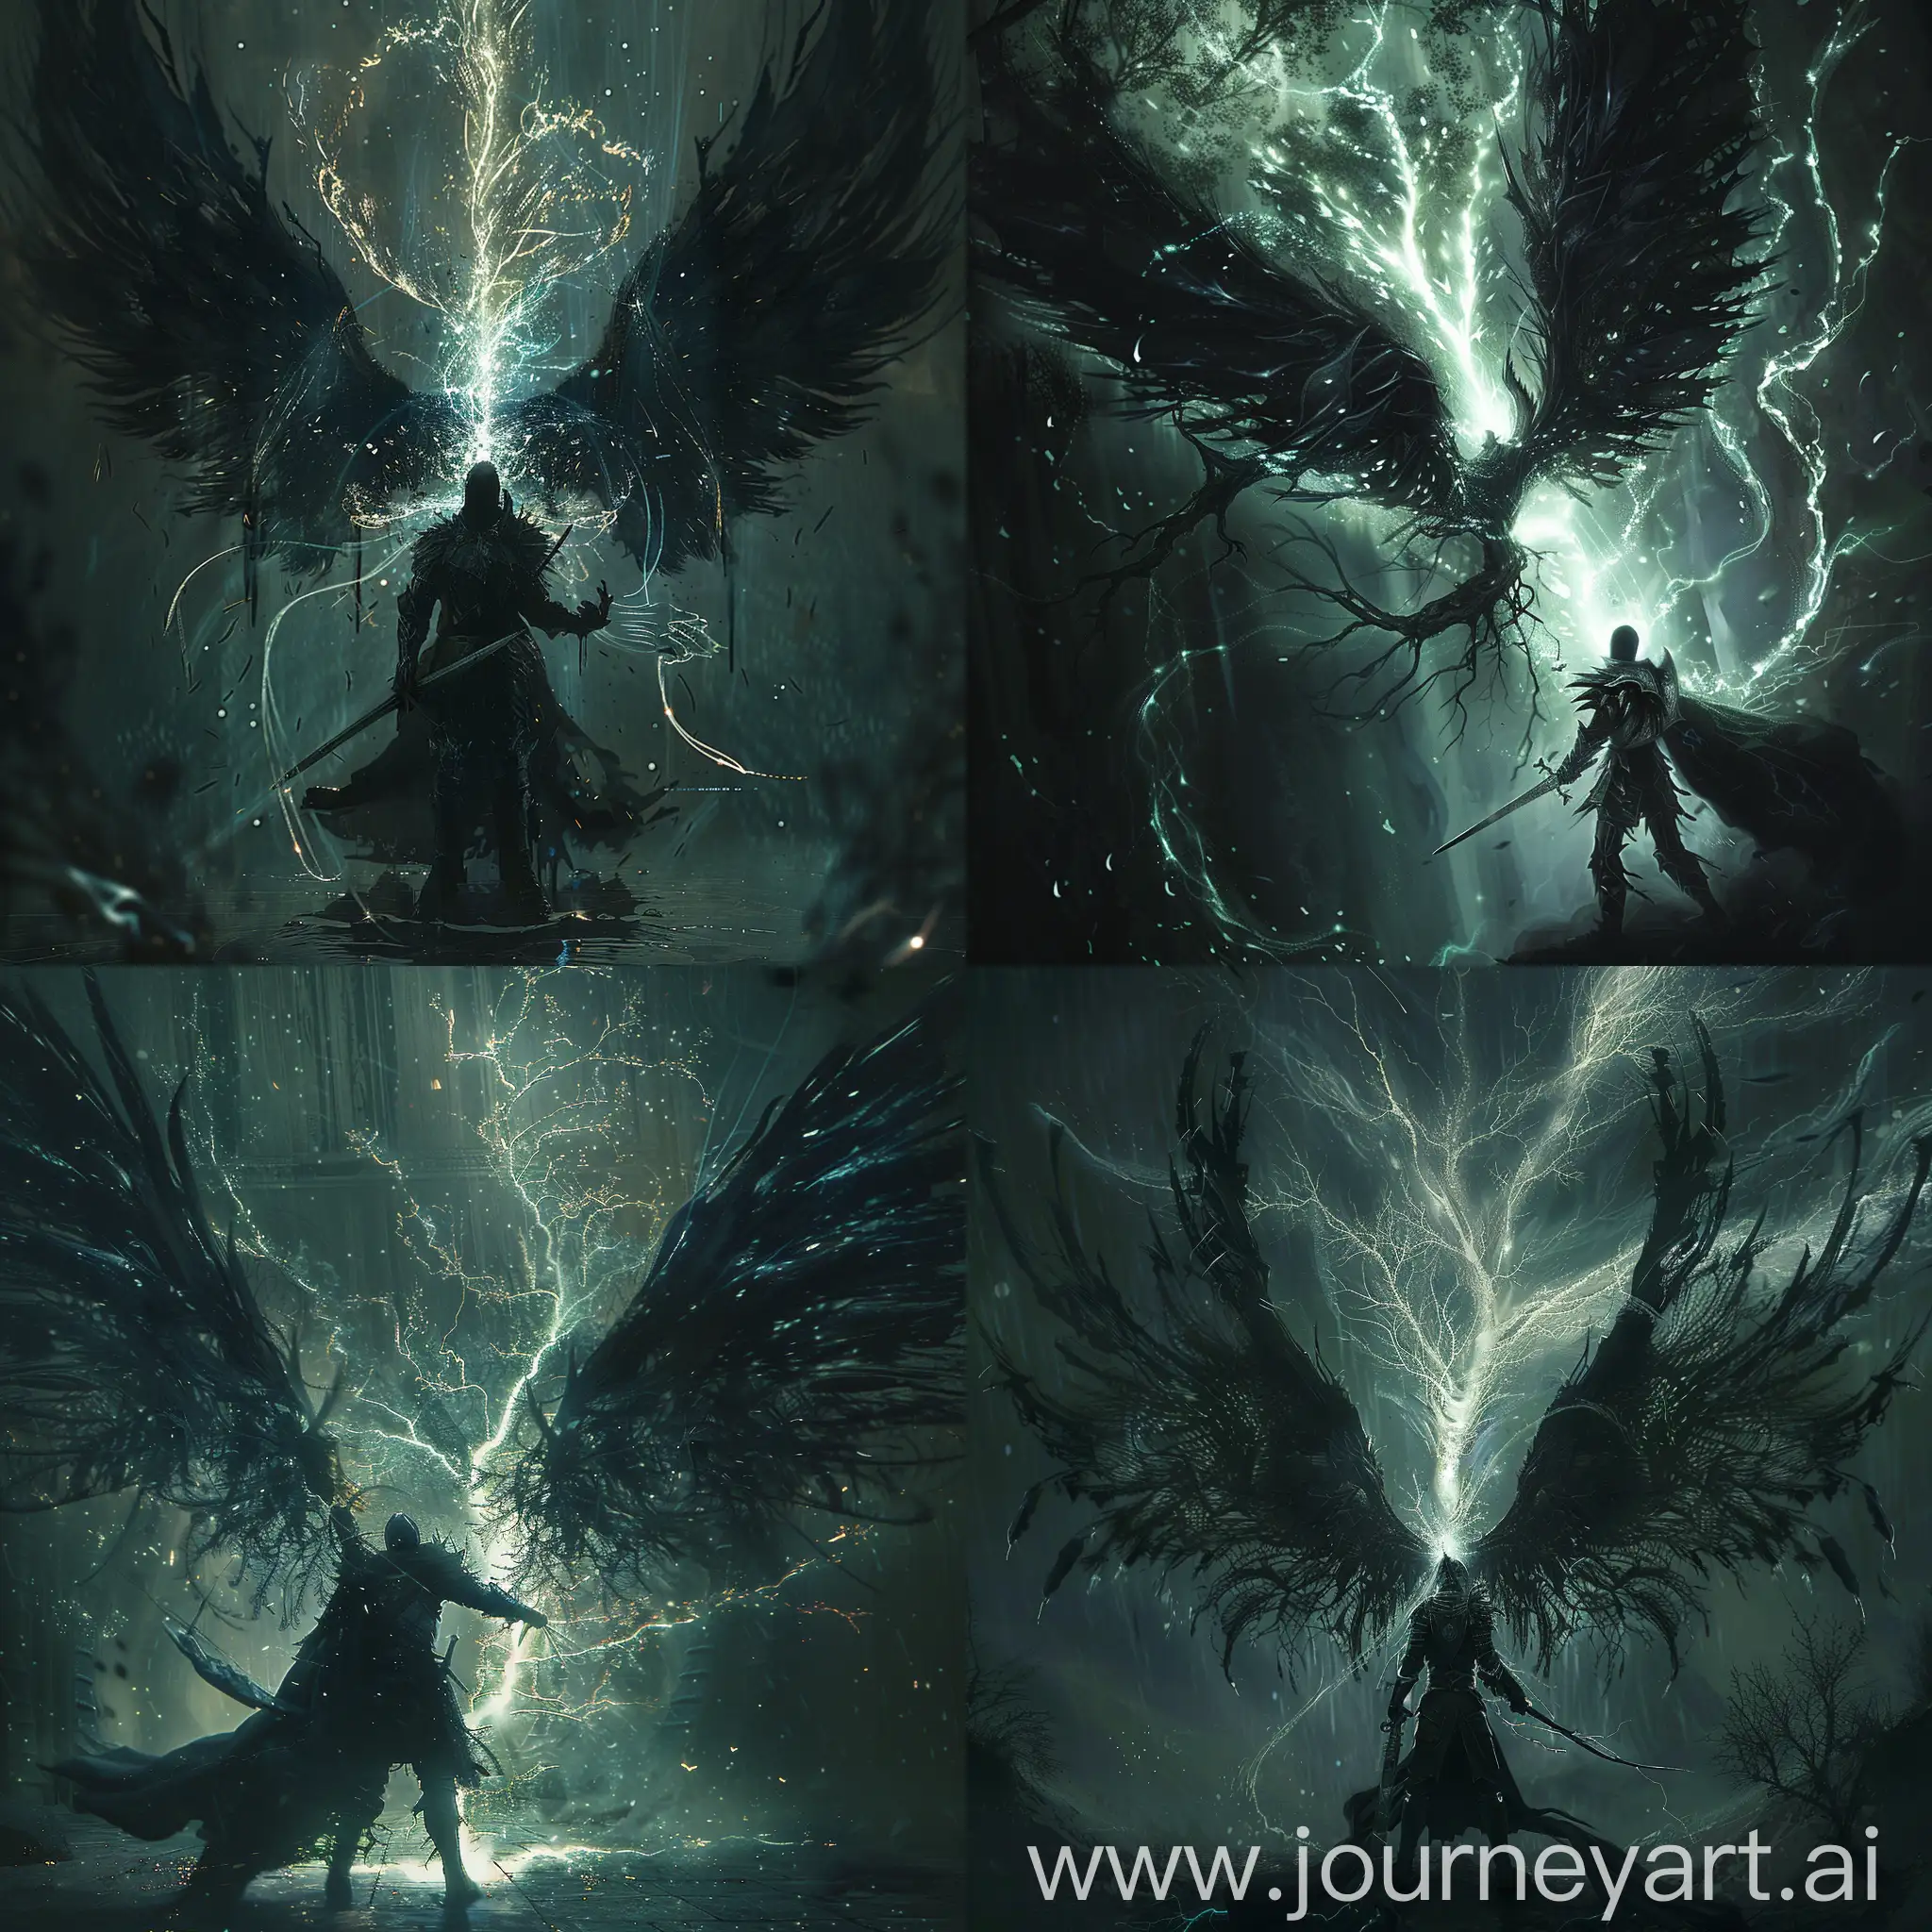 a dark, mystical scene featuring a figure in black armor, holding a sword, surrounded by an ethereal glow, with large, dark wings spread out, infused with an otherworldly energy that forms a luminous pattern resembling both wings and a tree, set against a dark and indistinct background.
https://www.bing.com/images/blob?bcid=RDoN-eiuyskGN245EViCQejR-LBt.....6g